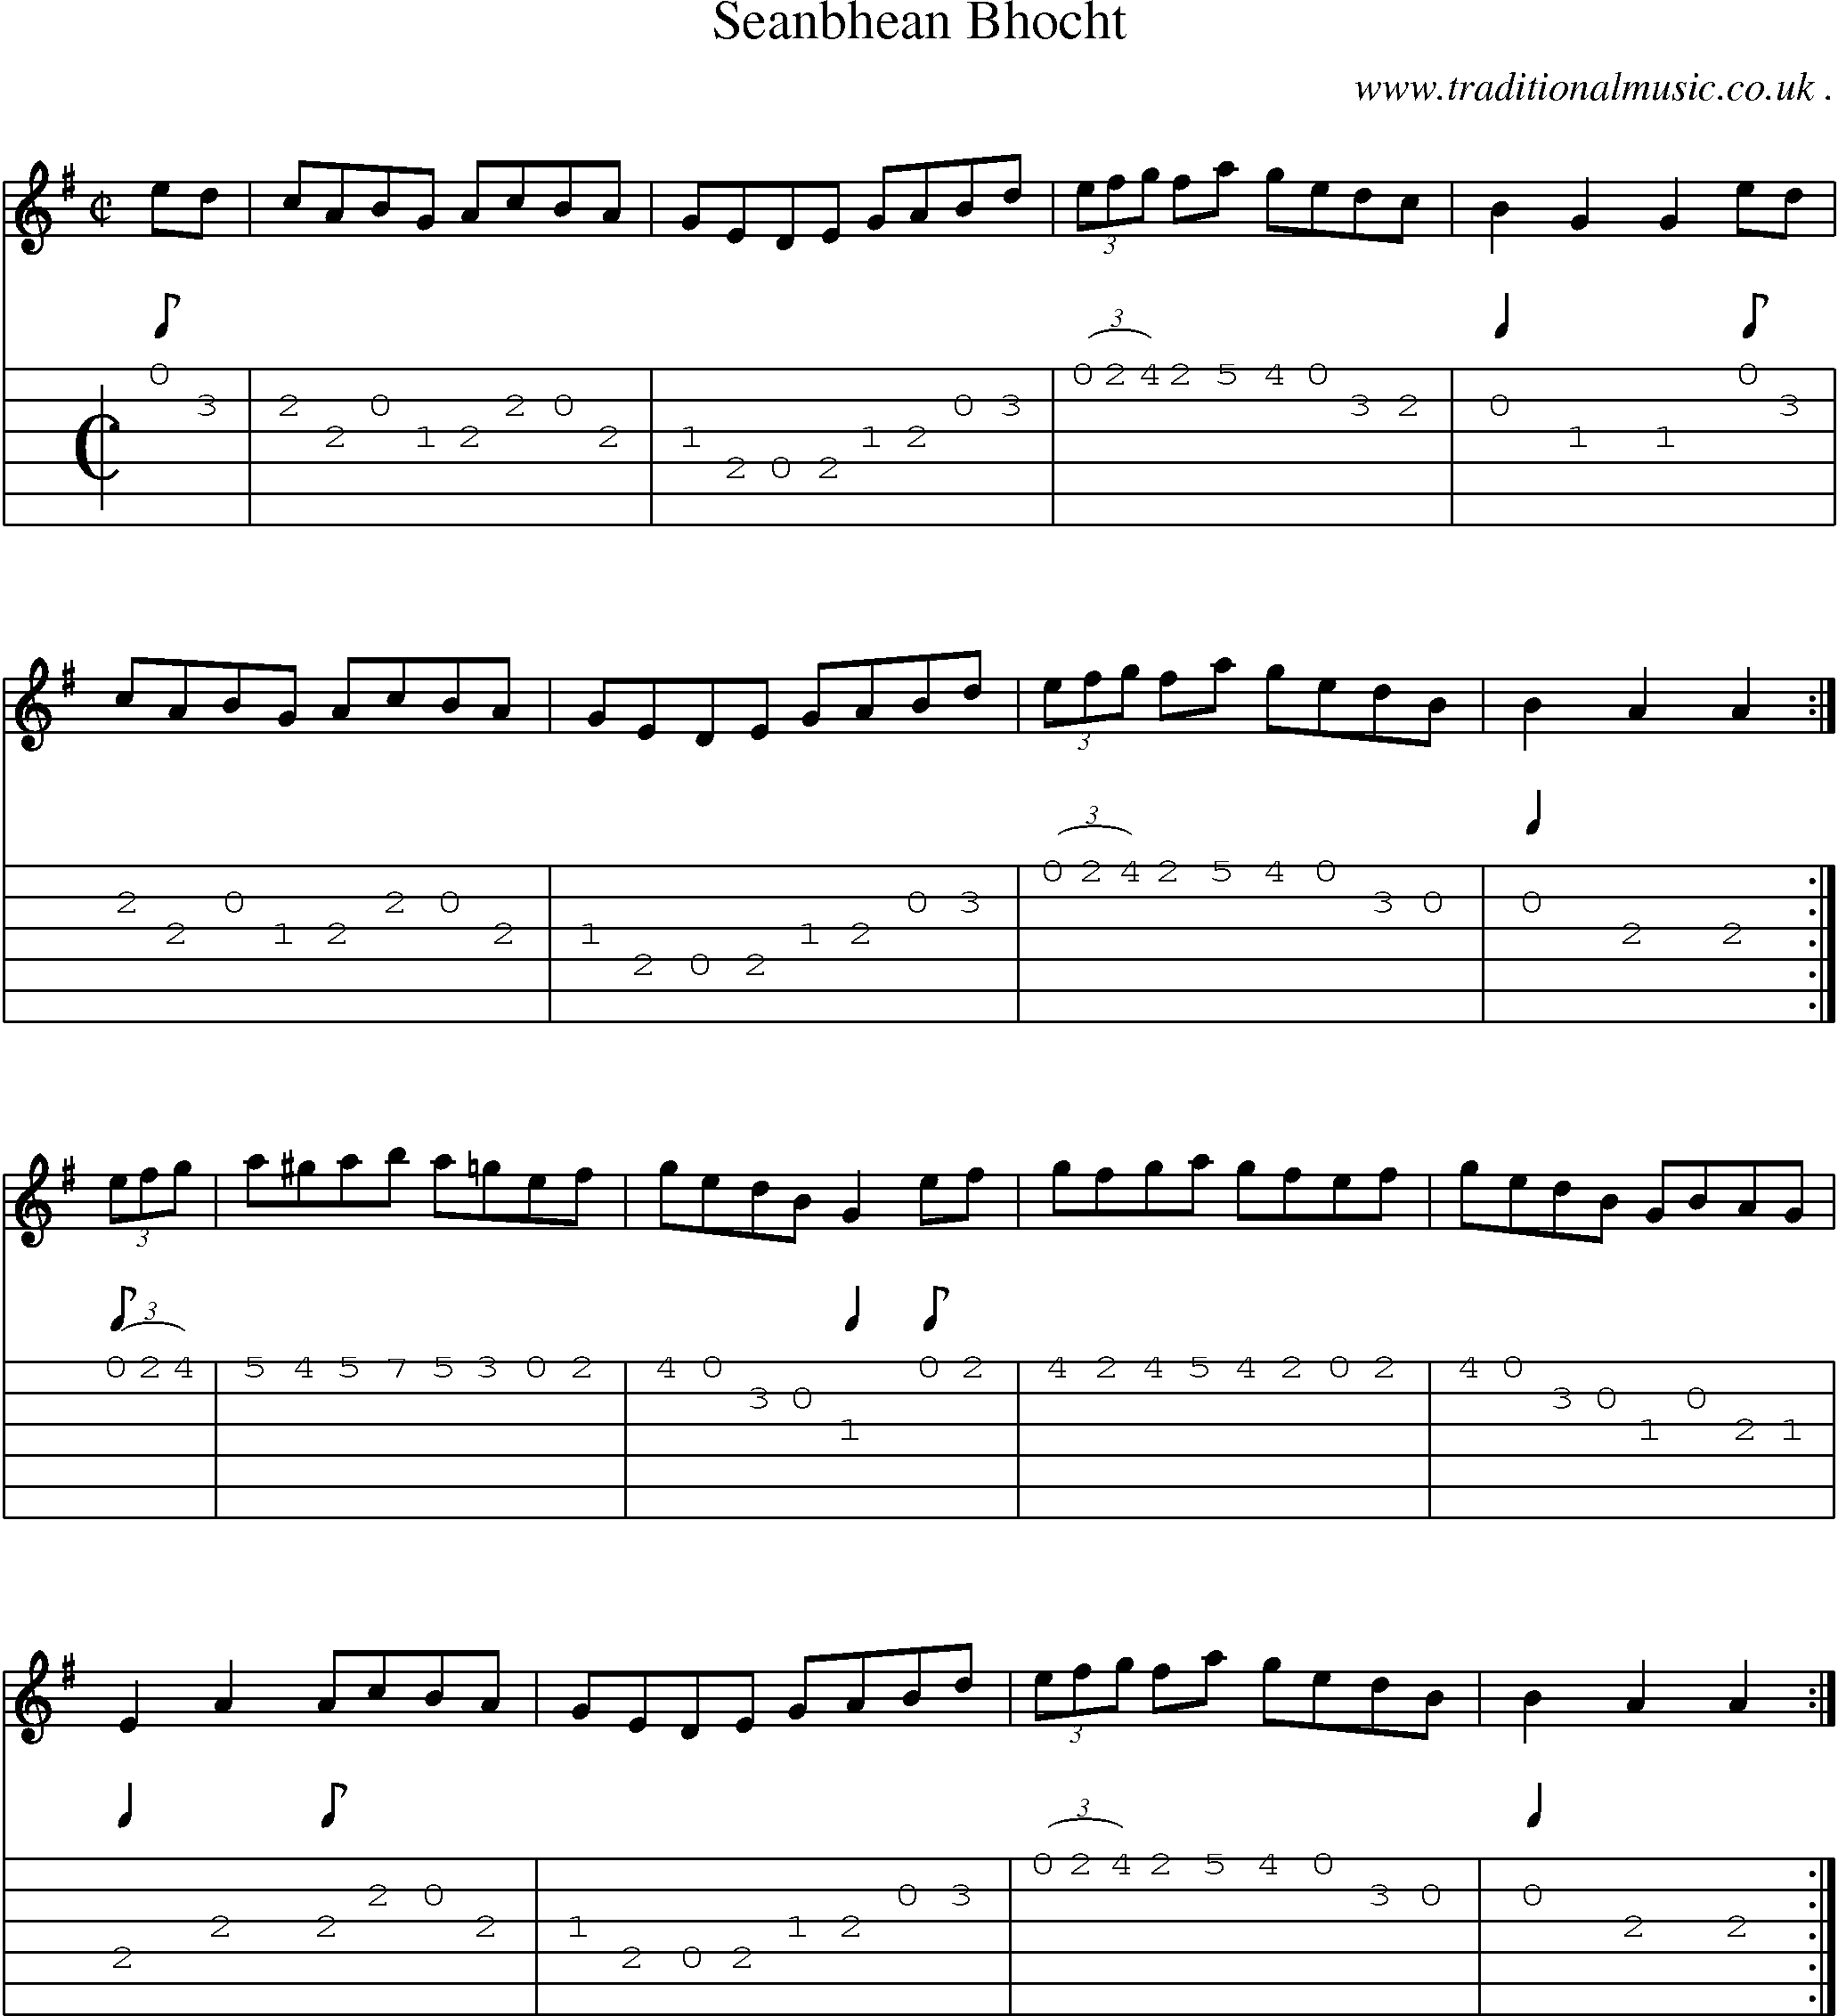 Sheet-Music and Guitar Tabs for Seanbhean Bhocht